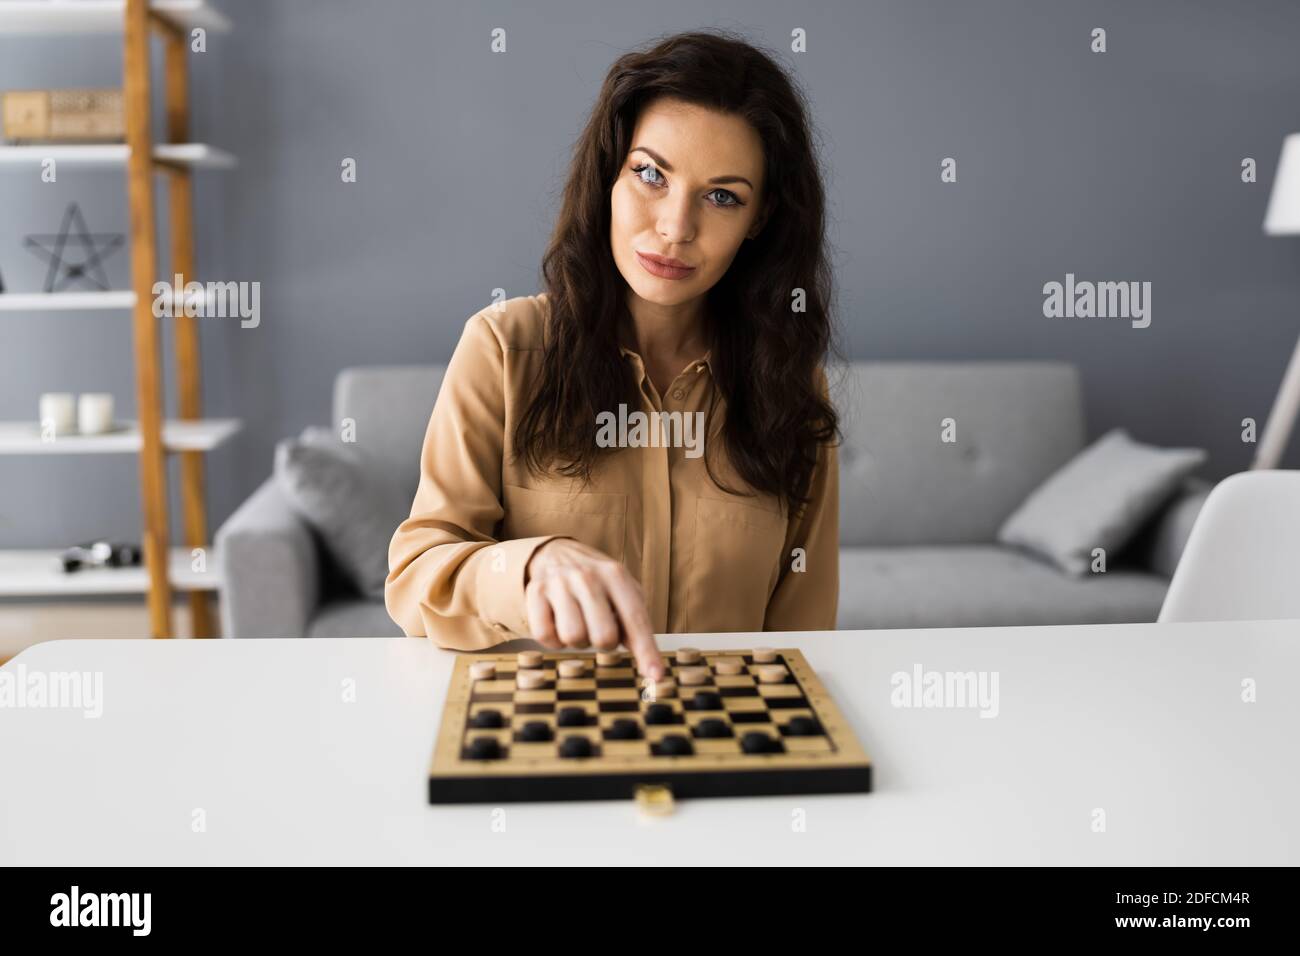 Woman Playing Checkers Online Using Video Conference Call Stock Photo